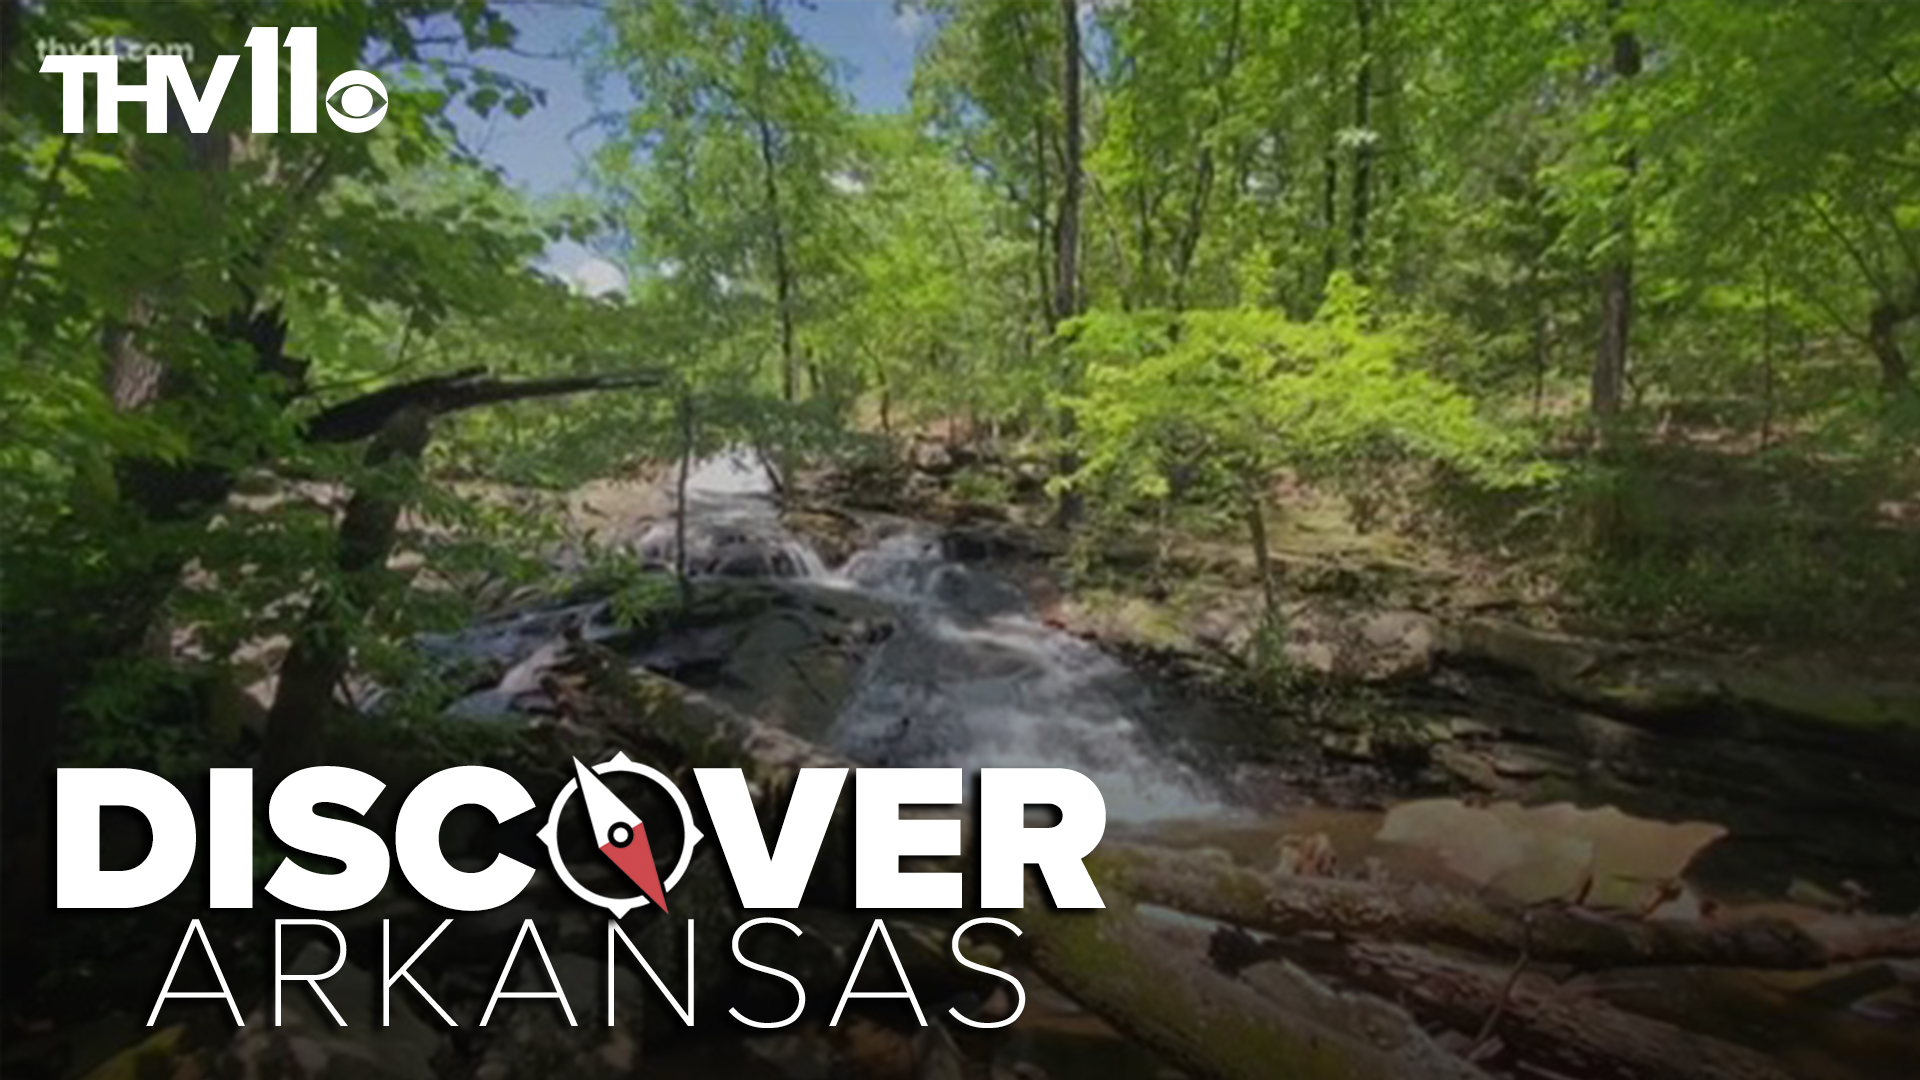 For this week's Discover Arkansas, you'll want to pack your hiking boots. Ashley King is taking us to a hidden gem that's perfect for you and the whole family.